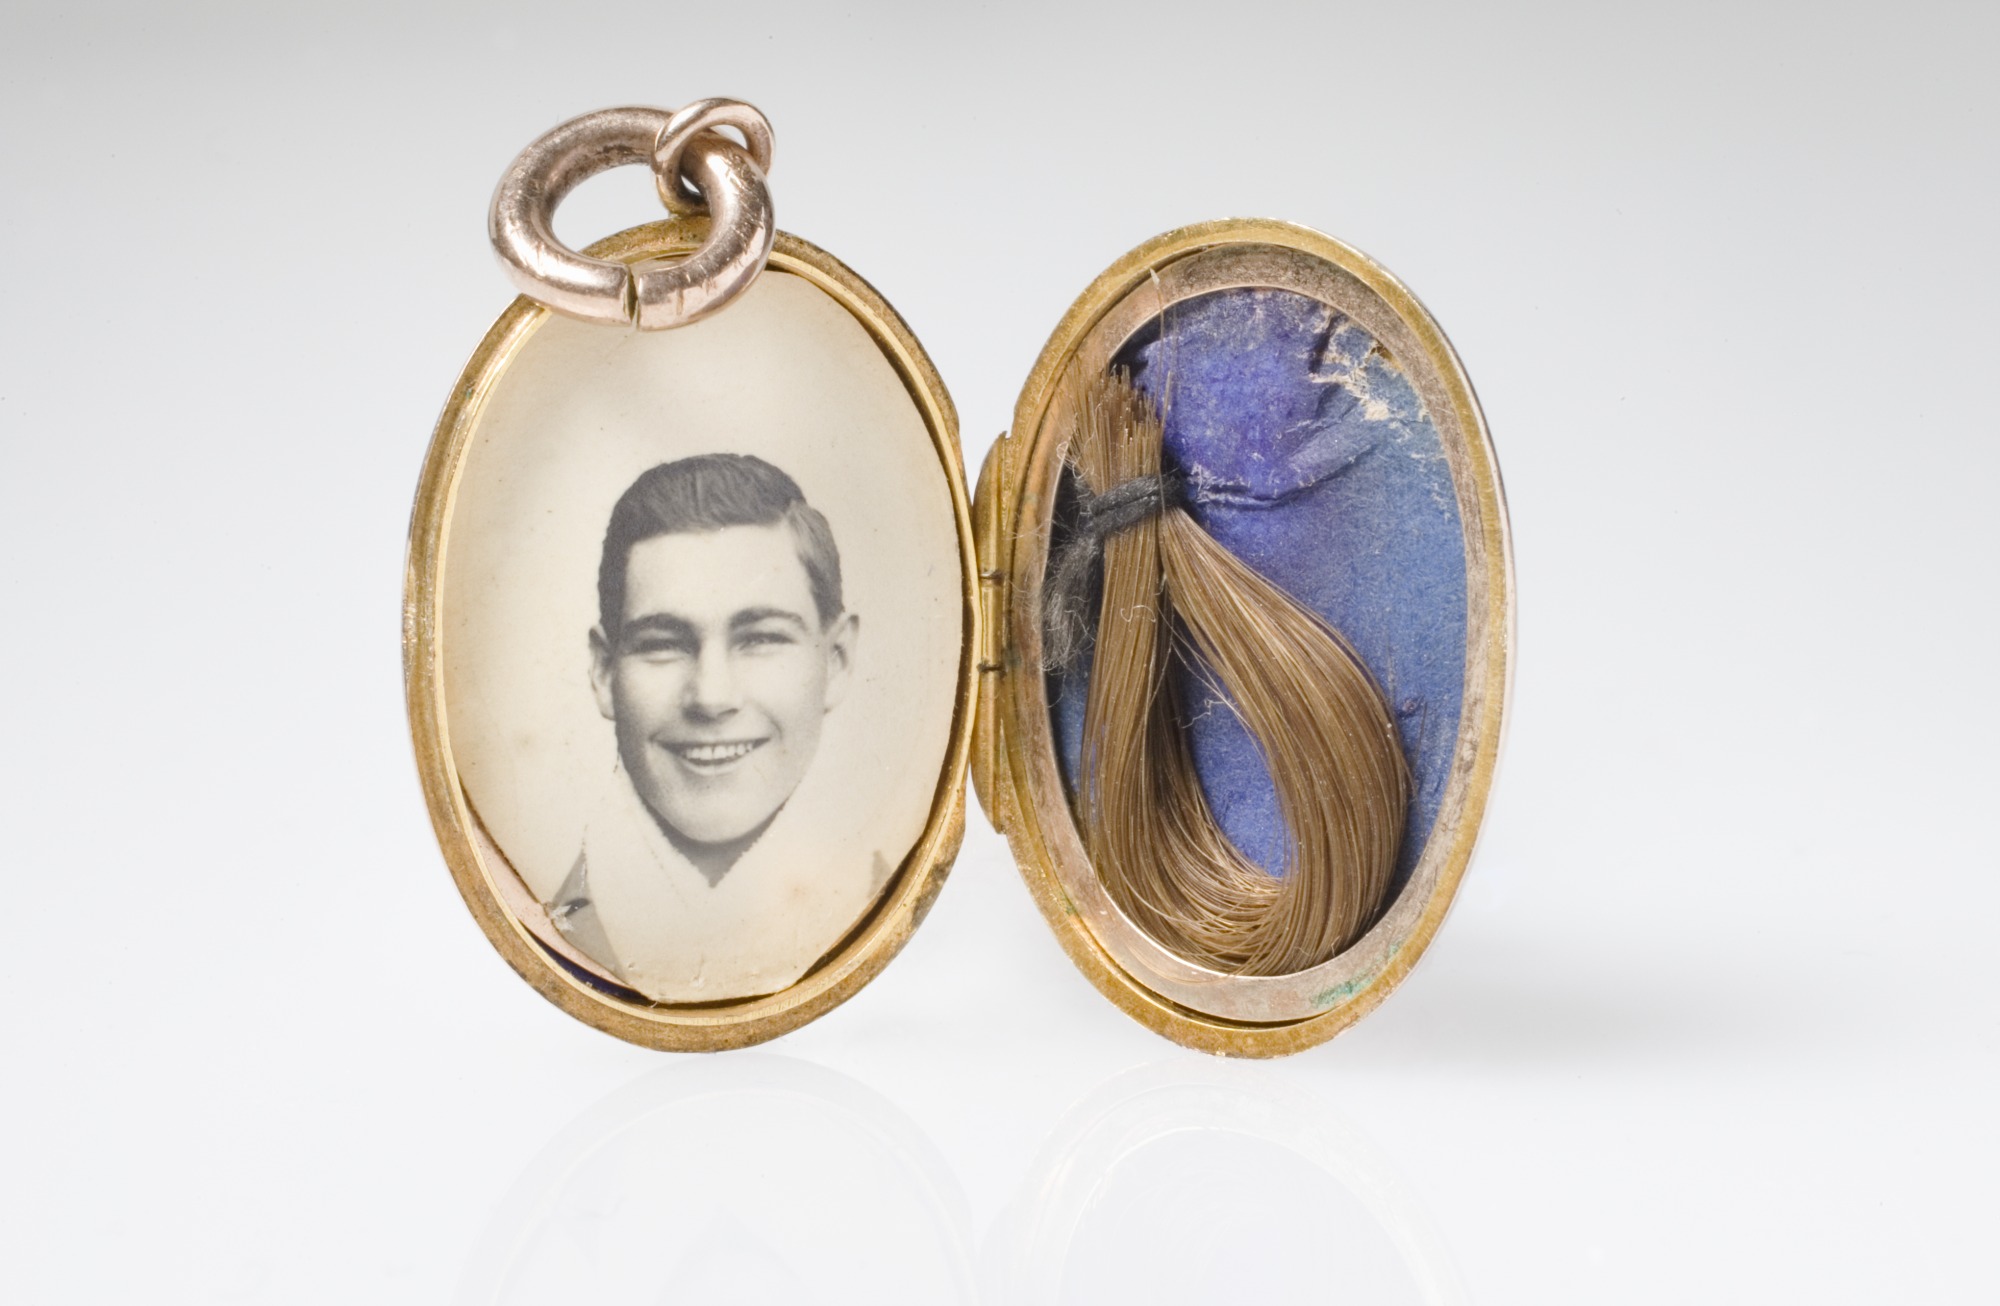 Gold mourning locket with a photograph of Australian champion boxer Les Darcy, who was at the centre of conscription debates because he did not volunteer to serve with the Australian Imperial Force. Darcy died in 1917.